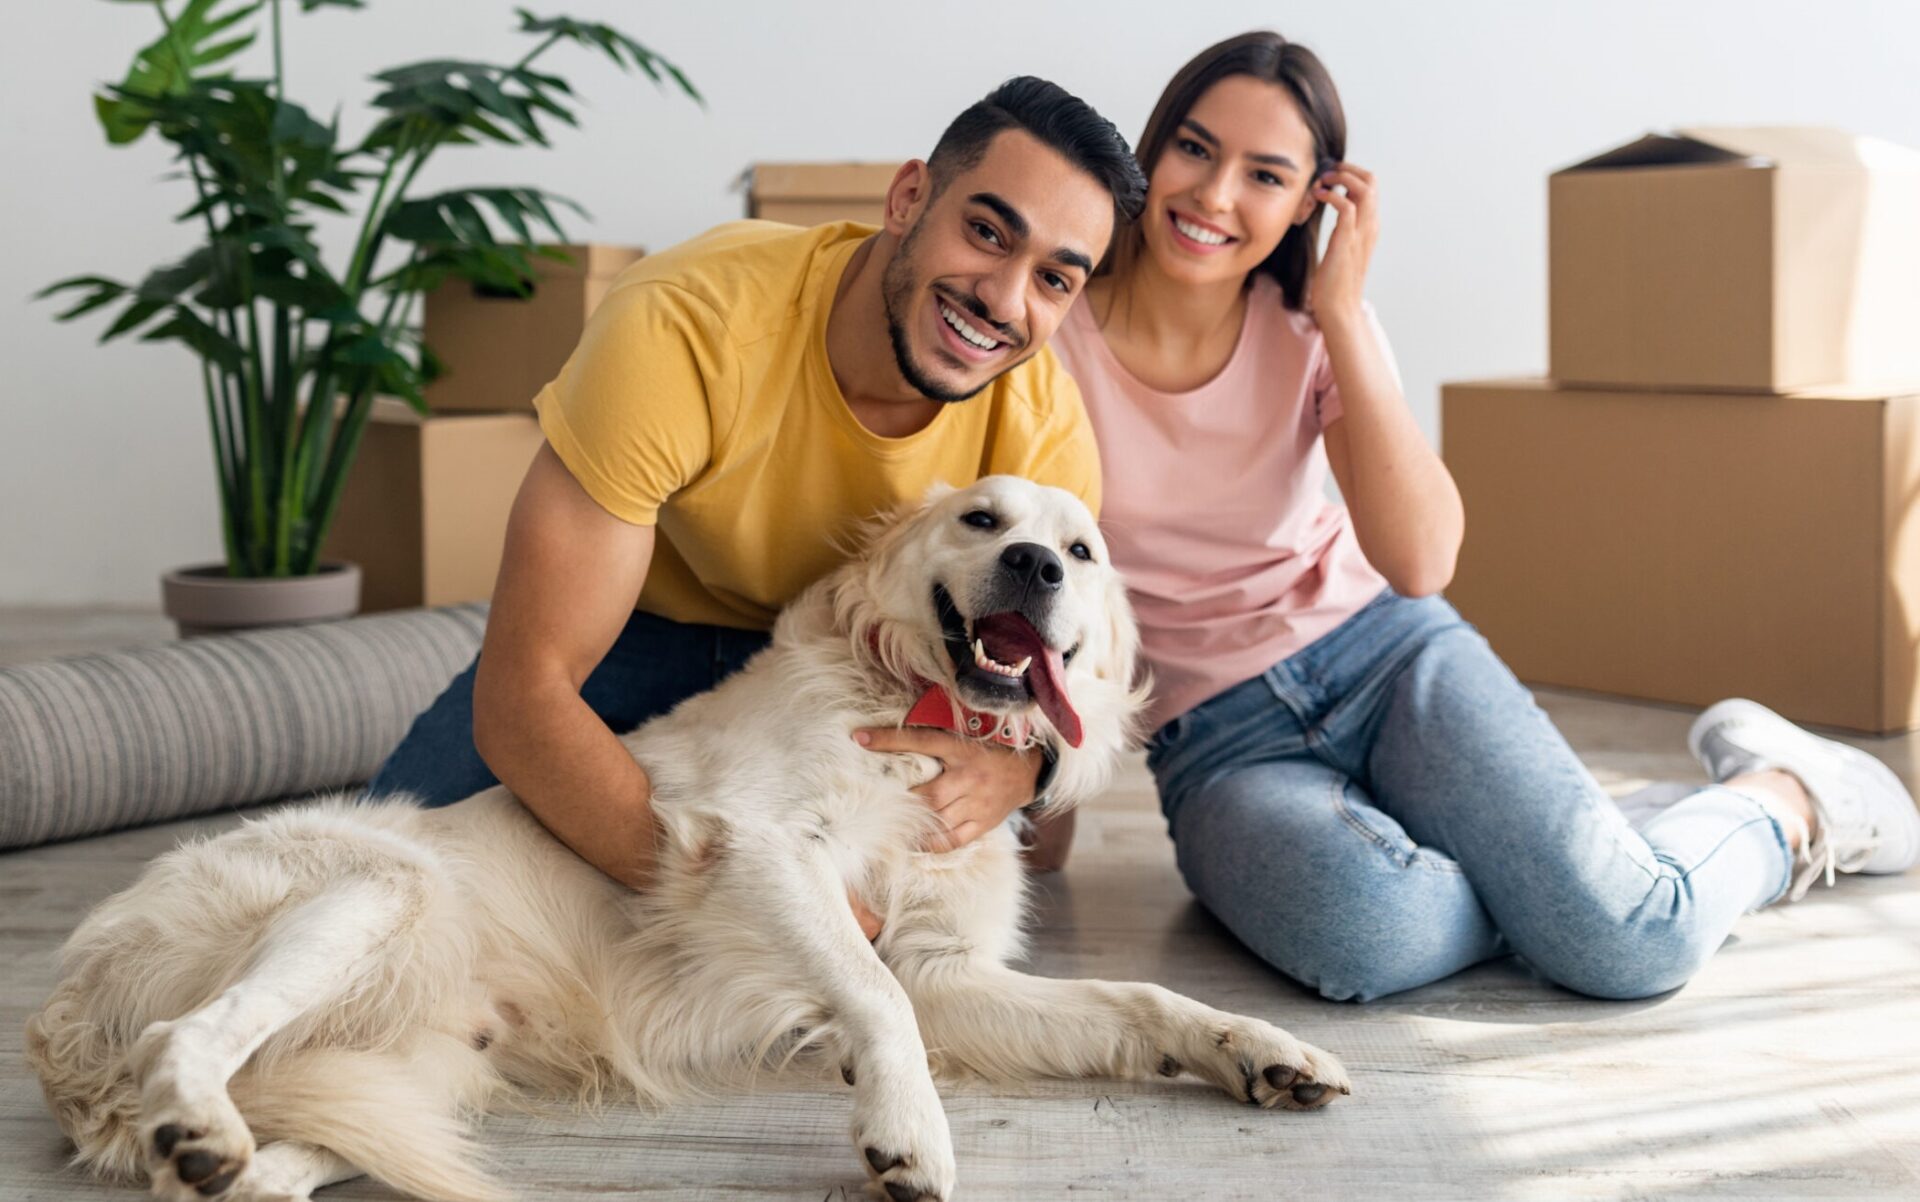 Zoomers Prioritize Pet-Friendliness Over Their Romantic Partners When Choosing A Home